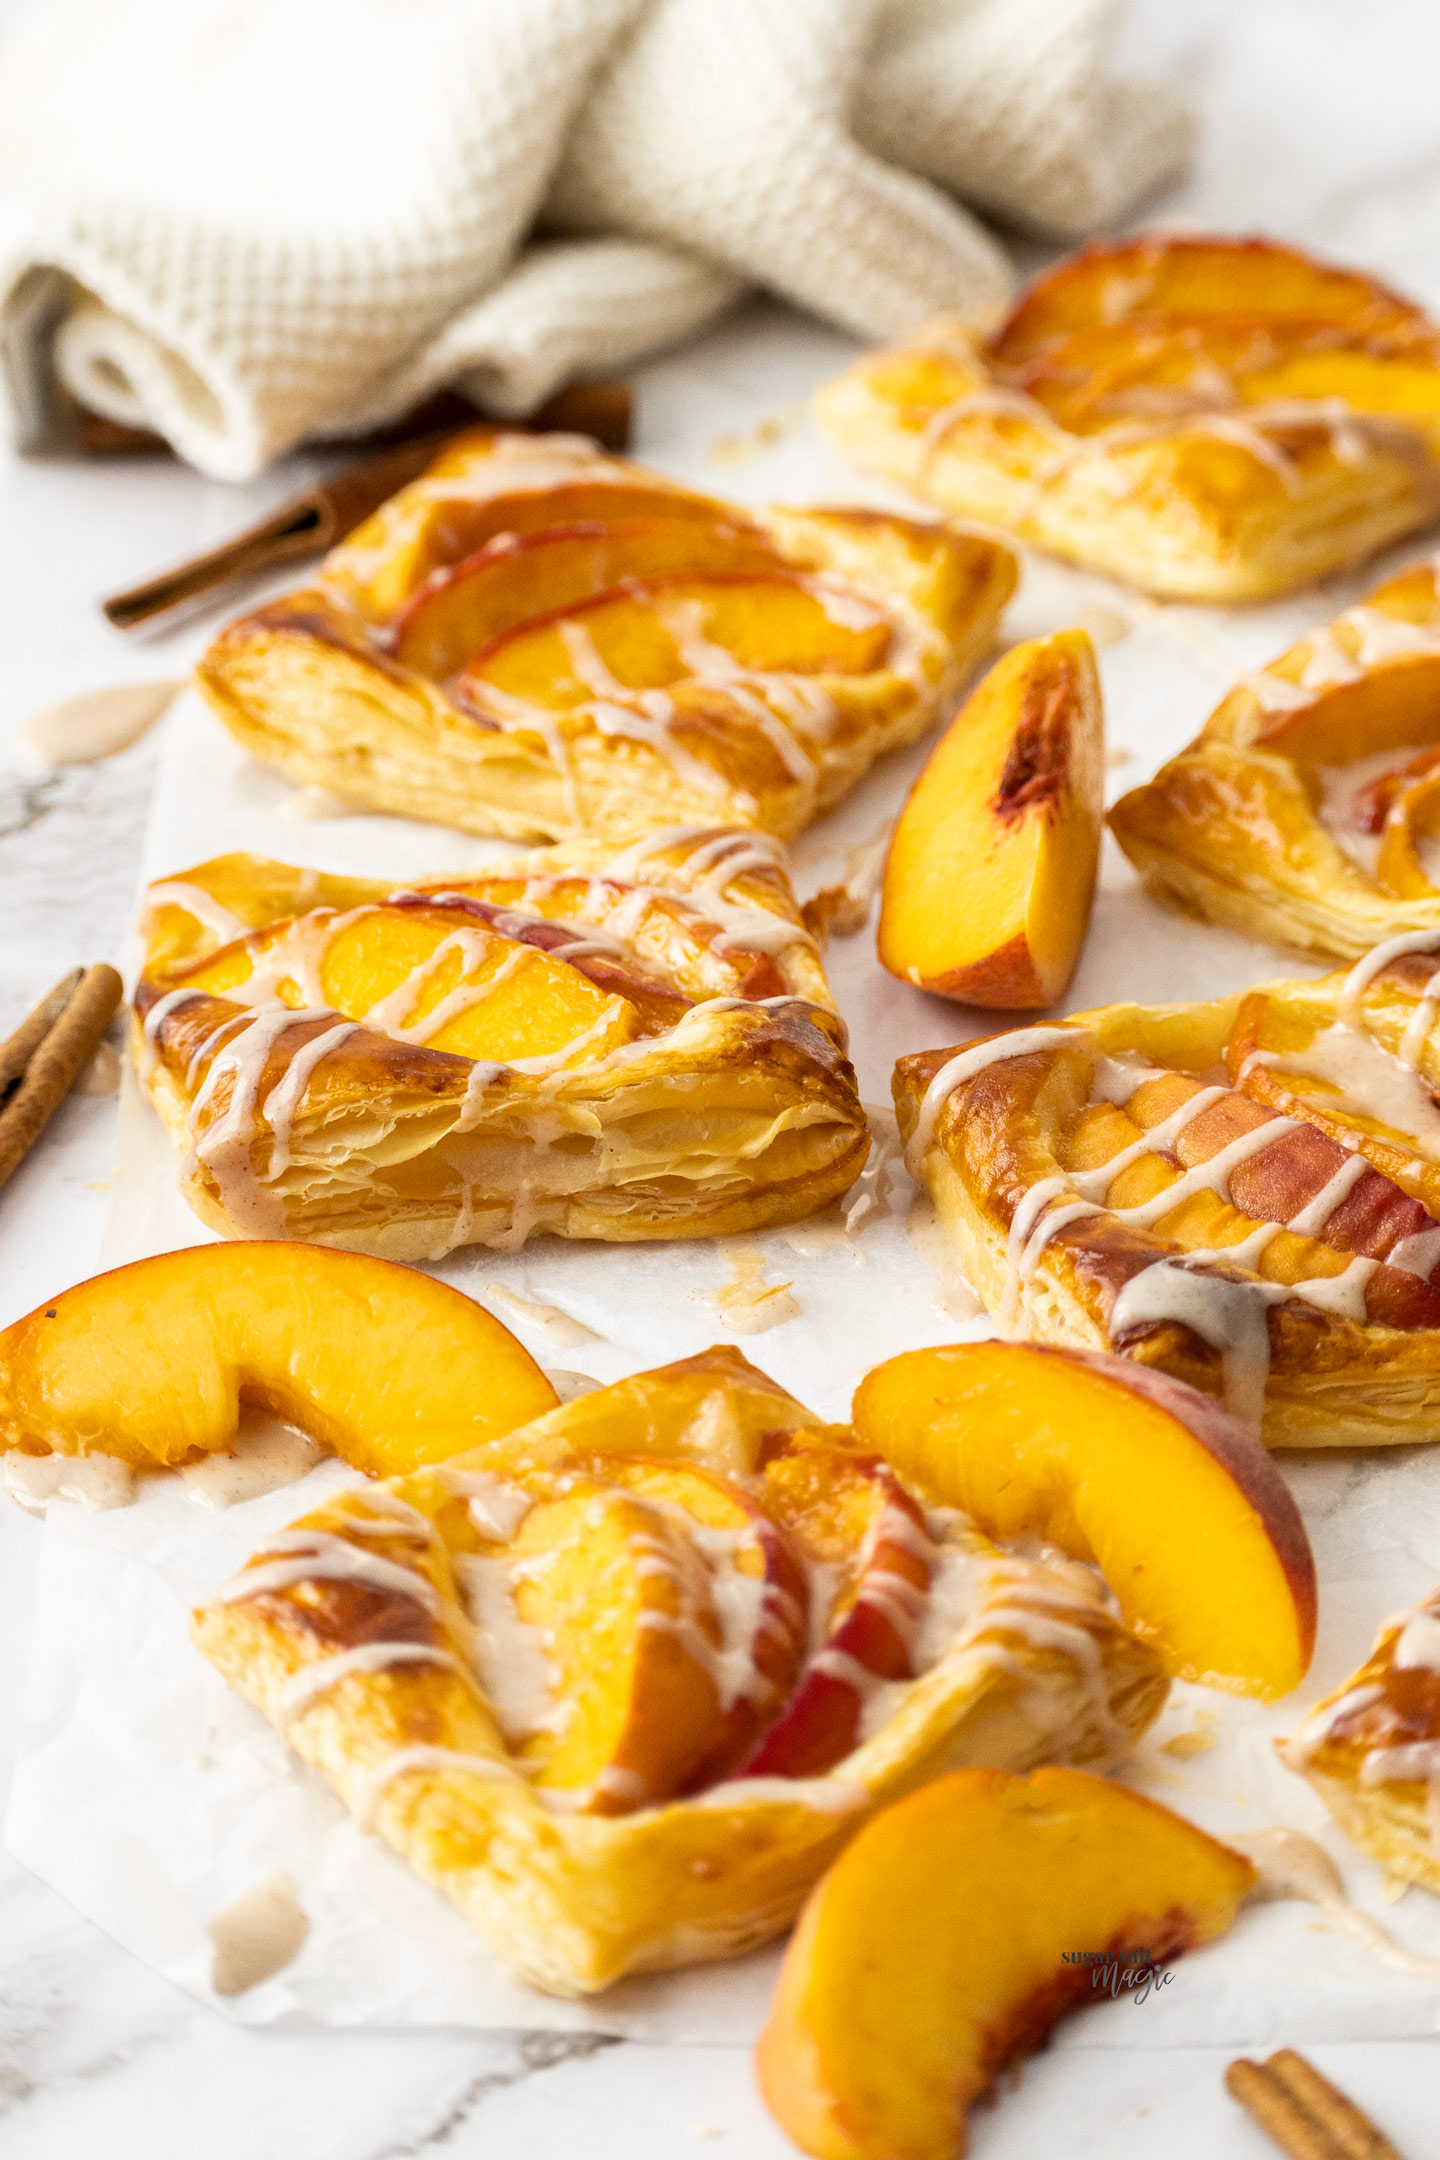 Image showing the layers of pastry on the peach tarts.